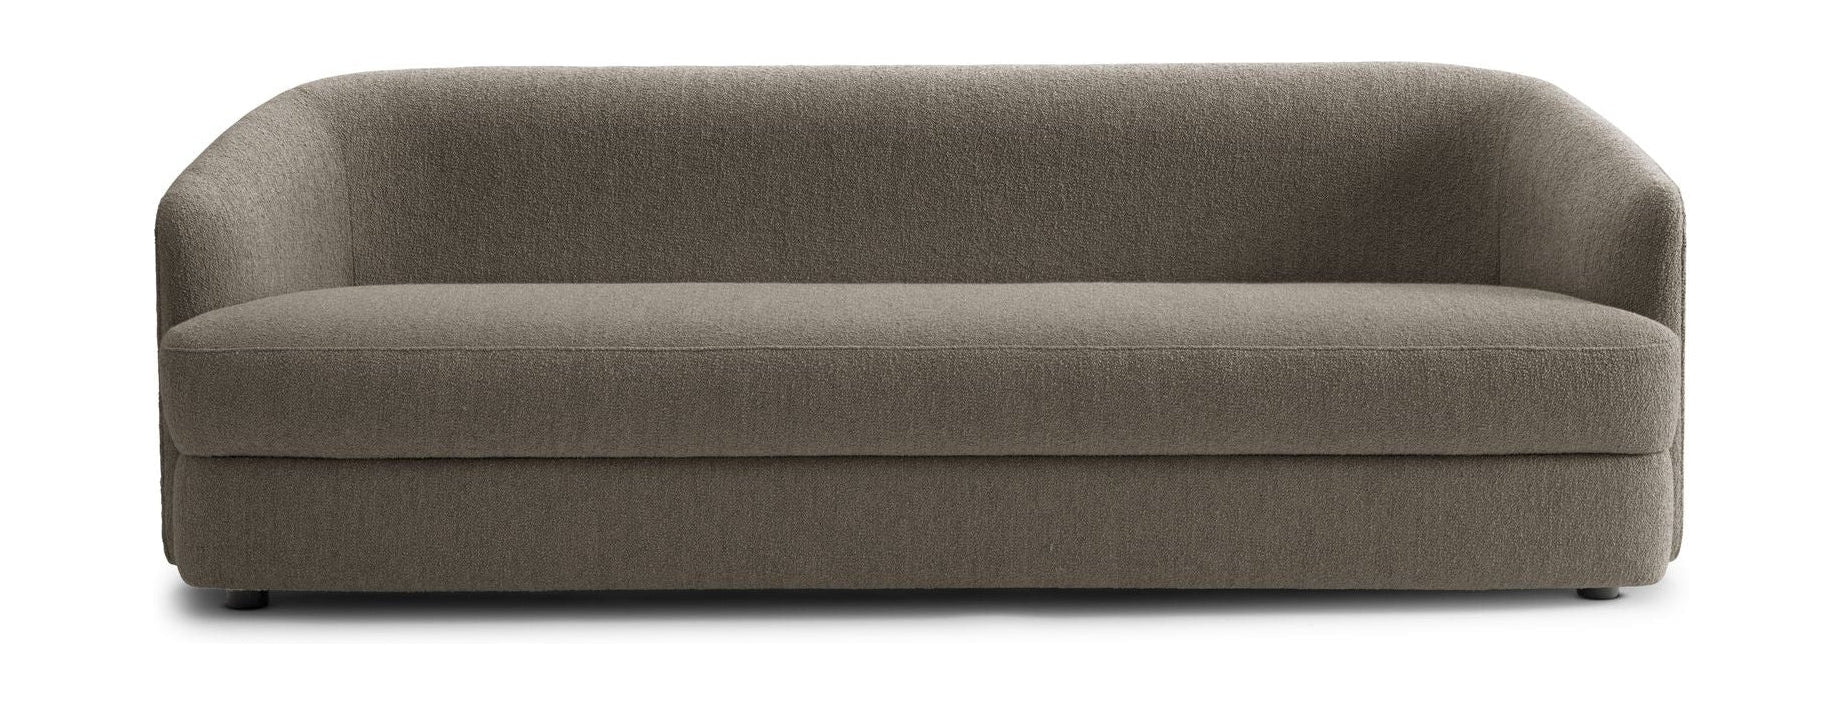 New Works Covent Sofa 3 -Sitzer, dunkles Taupe